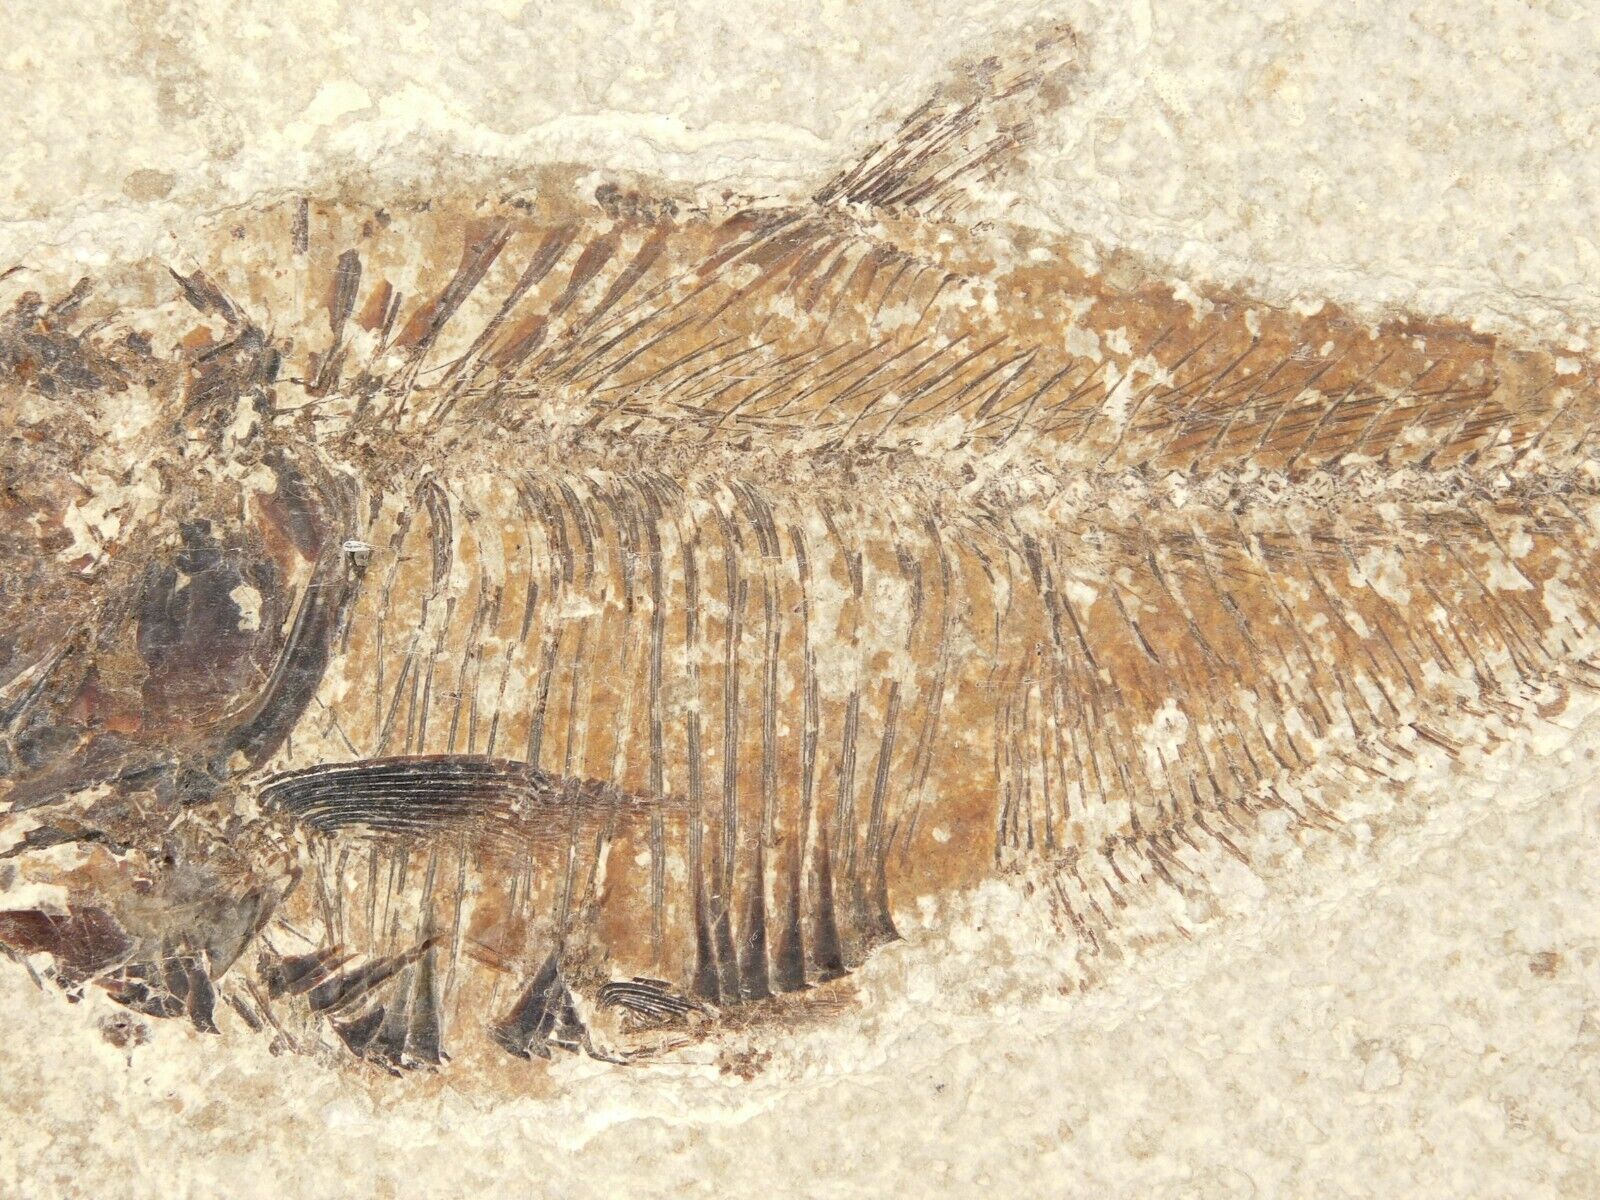 50 Million Year Old Diplomystus FISH Fossil With Stand From Wyoming 467gr